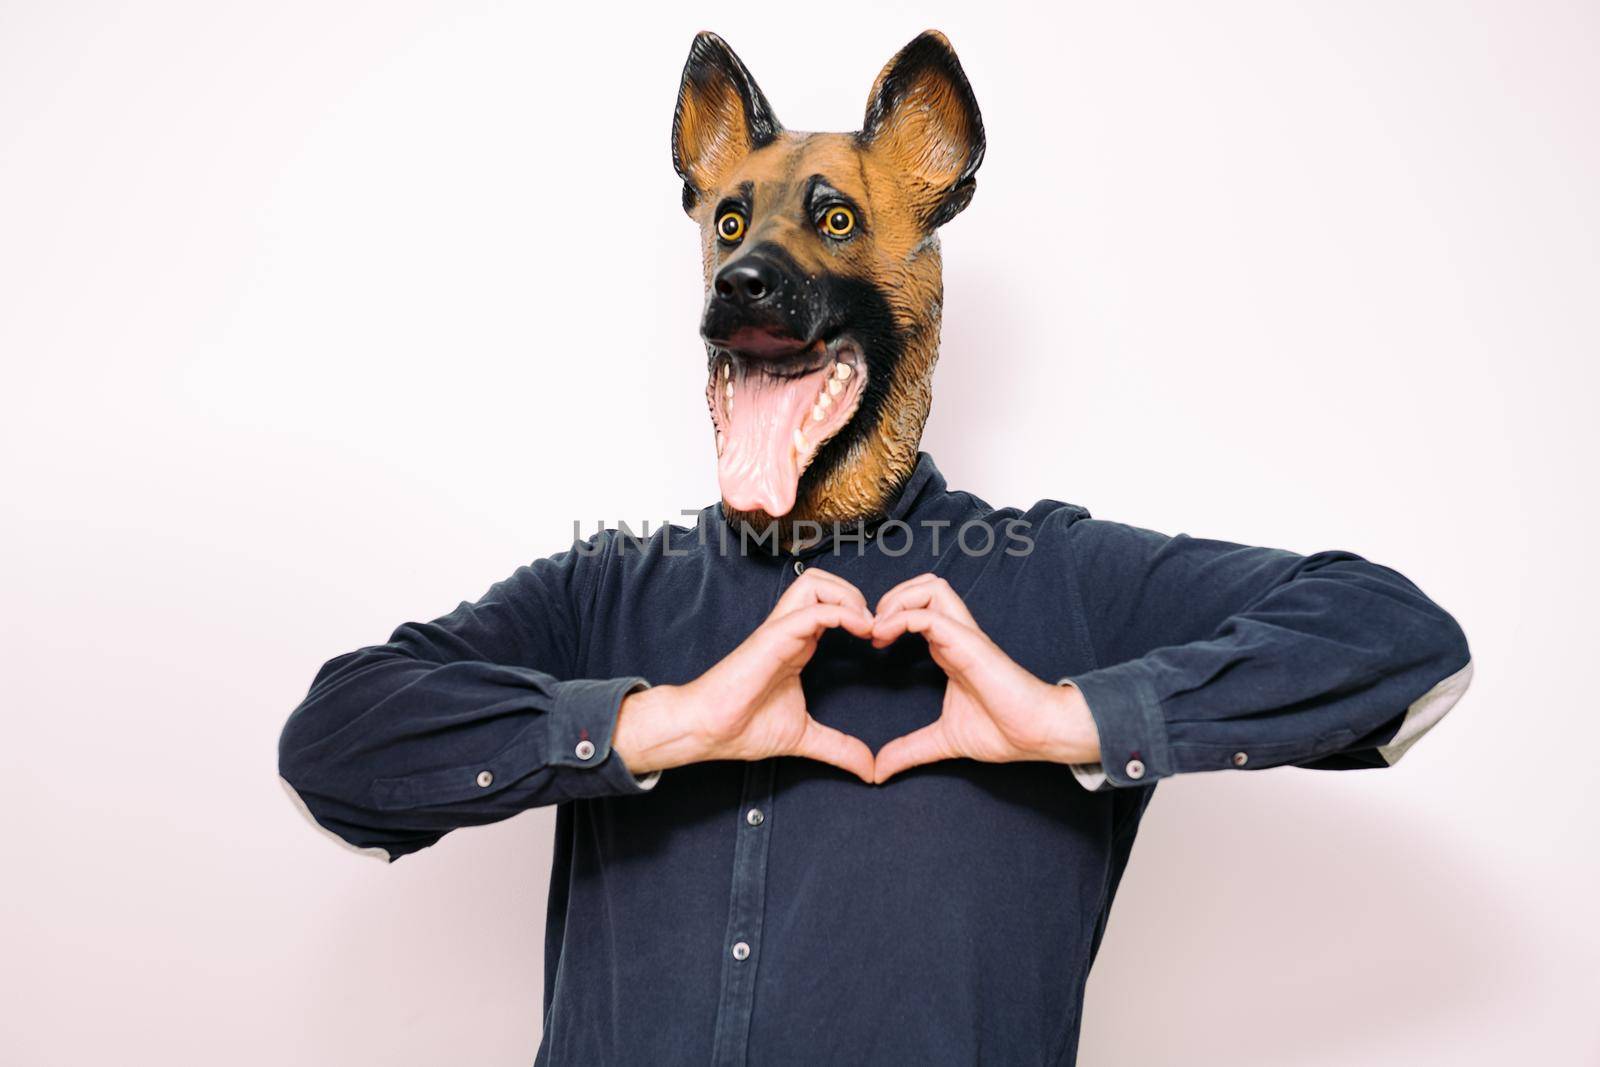 person with dog mask making heart shape with hands by raulmelldo